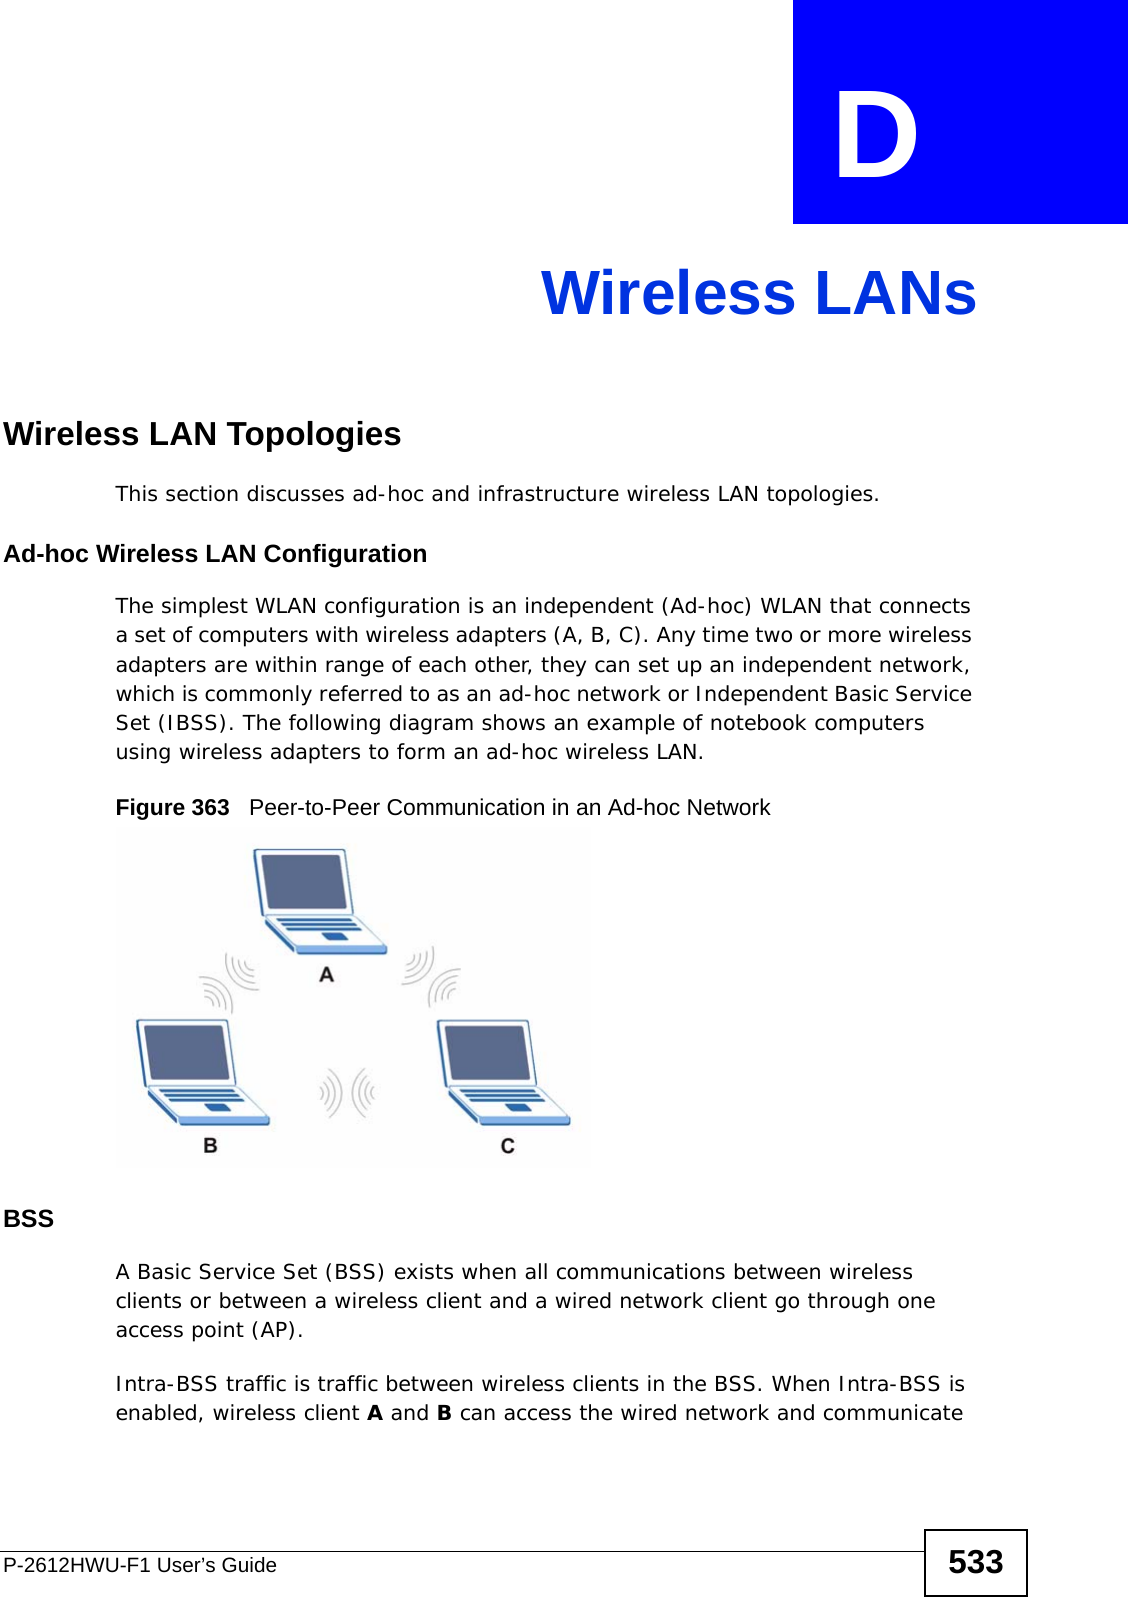 P-2612HWU-F1 User’s Guide 533APPENDIX  D Wireless LANsWireless LAN TopologiesThis section discusses ad-hoc and infrastructure wireless LAN topologies.Ad-hoc Wireless LAN ConfigurationThe simplest WLAN configuration is an independent (Ad-hoc) WLAN that connects a set of computers with wireless adapters (A, B, C). Any time two or more wireless adapters are within range of each other, they can set up an independent network, which is commonly referred to as an ad-hoc network or Independent Basic Service Set (IBSS). The following diagram shows an example of notebook computers using wireless adapters to form an ad-hoc wireless LAN. Figure 363   Peer-to-Peer Communication in an Ad-hoc NetworkBSSA Basic Service Set (BSS) exists when all communications between wireless clients or between a wireless client and a wired network client go through one access point (AP). Intra-BSS traffic is traffic between wireless clients in the BSS. When Intra-BSS is enabled, wireless client A and B can access the wired network and communicate 